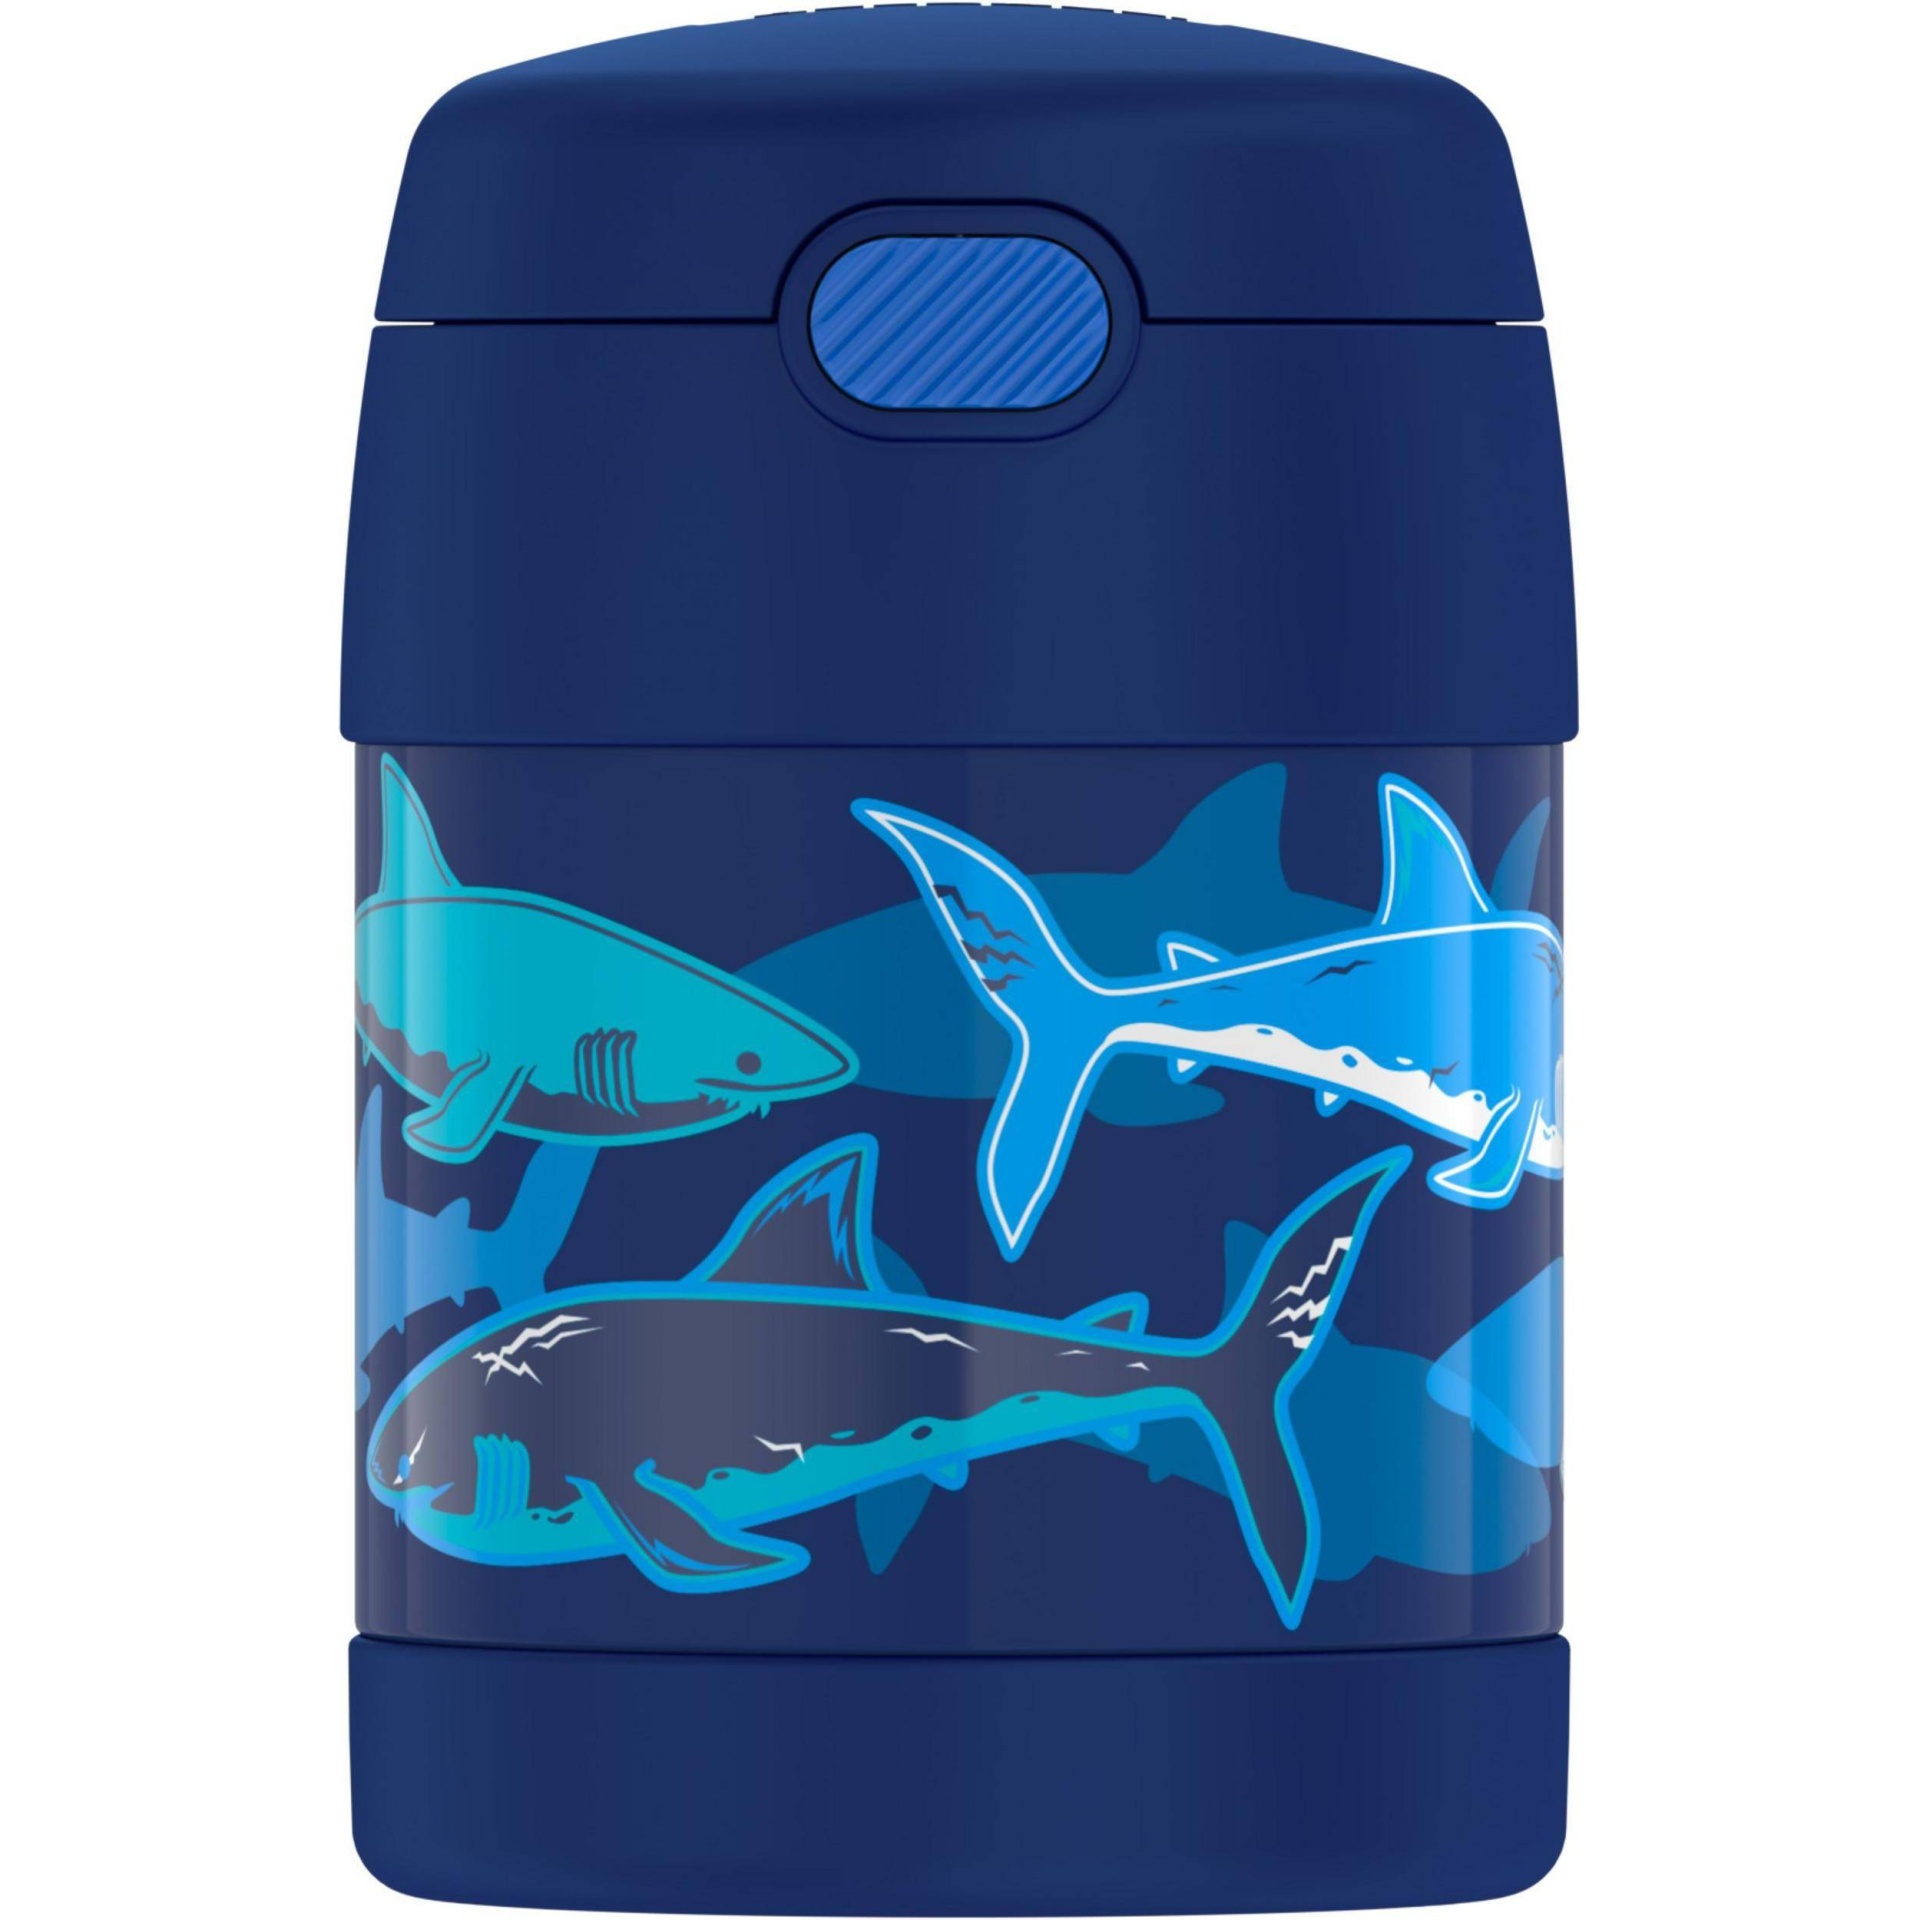 Thermos 10oz FUNtainer Food Jar with Spoon - Navy Sharks 1 ct